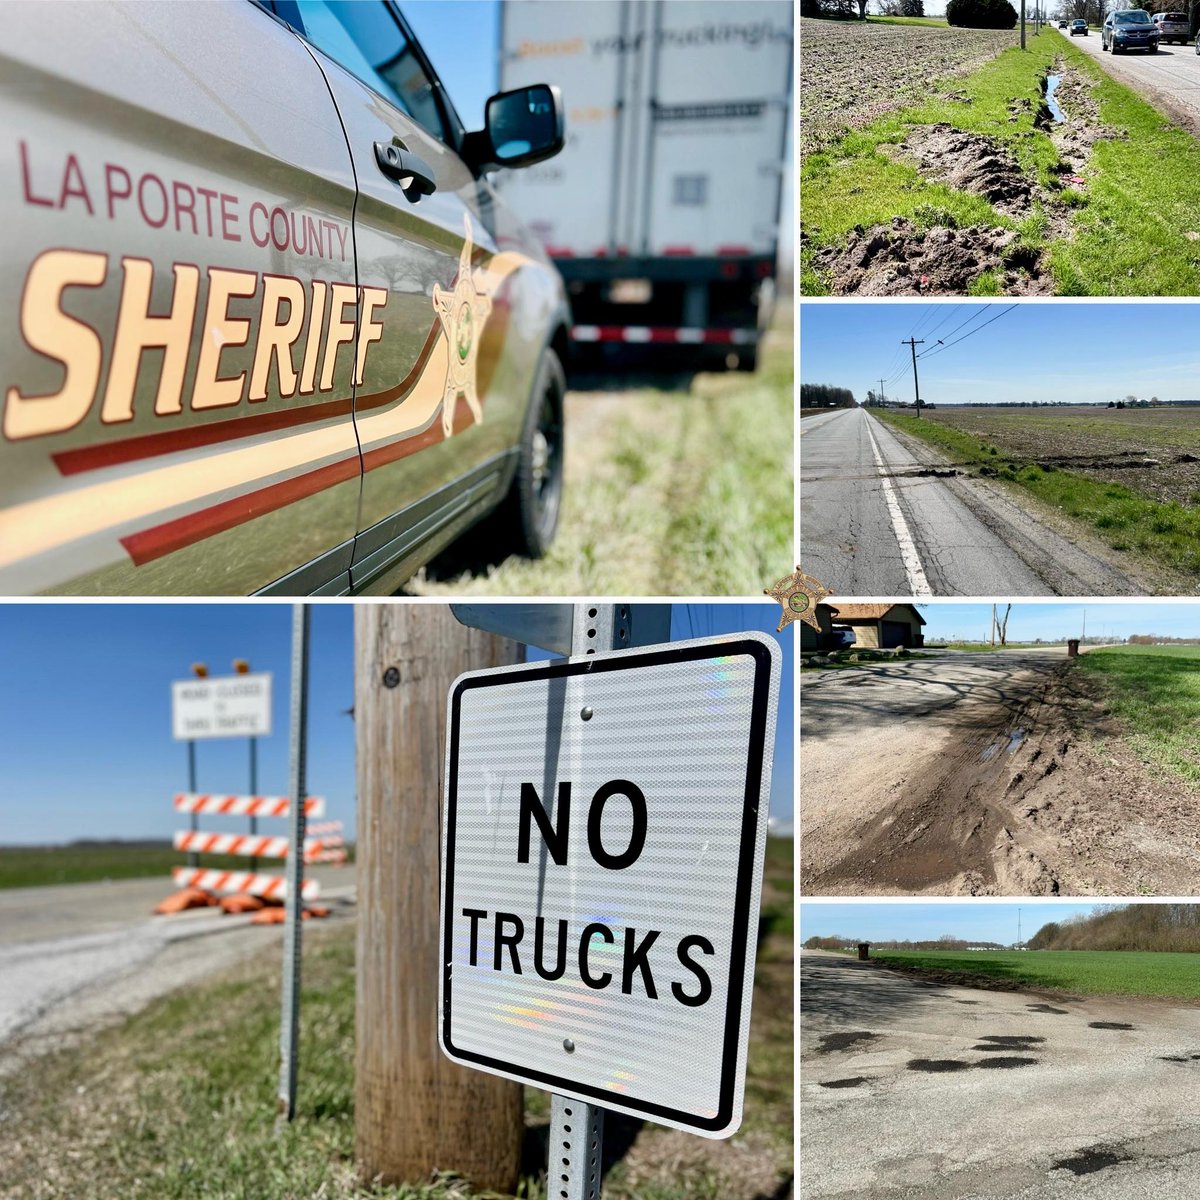 🚧#LaPorteCounty Sheriff's Office ramps up enforcement amidst increased traffic due to US 6 / US 421 South Junction closure.
Commercial drivers urged to obey detours, respect county roads🛣️
#TrafficAlert #Enforcement #RoadSafety #Truckers #Trucking #TruckingUSA #Truckers #NewsUSA